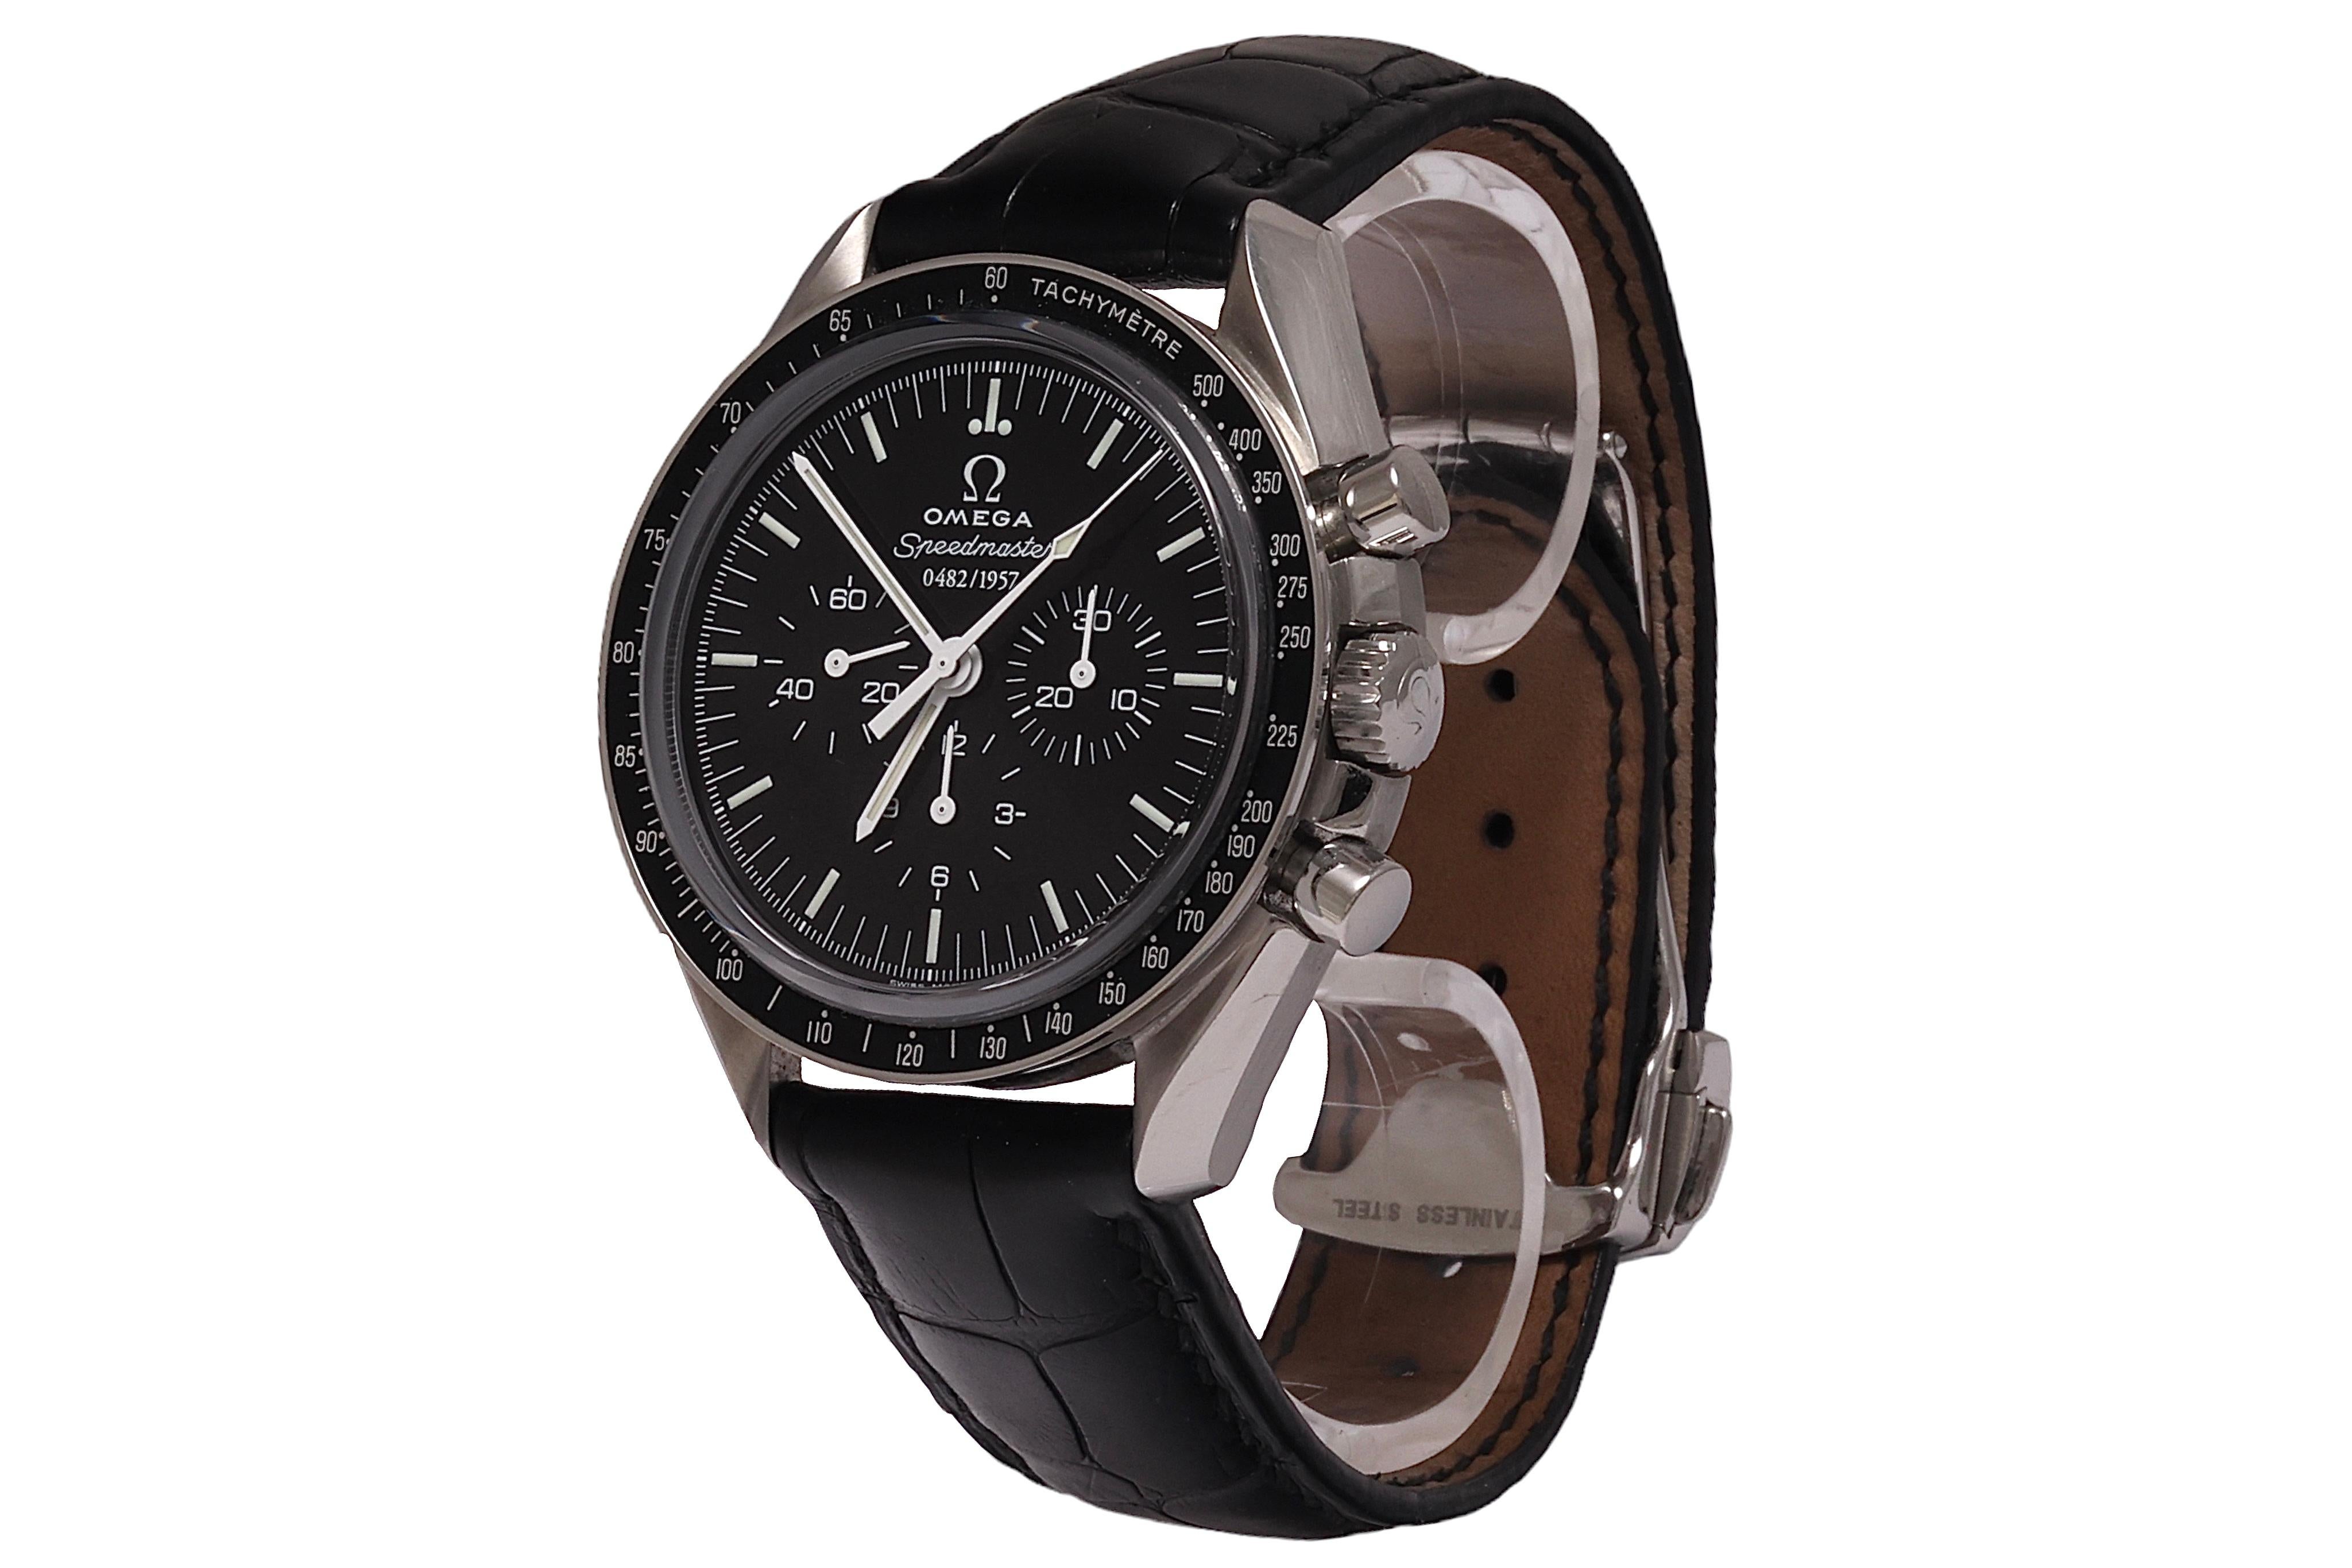 Omega Speedmaster 50th Anniversary Limited Edition Co Axial Chronograph Watch with Huge Wood Inlaid Omega Matching Box & Limited Edition Certificate

Brand: Omega
Ref. No.: 311.33.42.50.01.001
Model: Speedmaster Manual-winding Black Dial Stainless